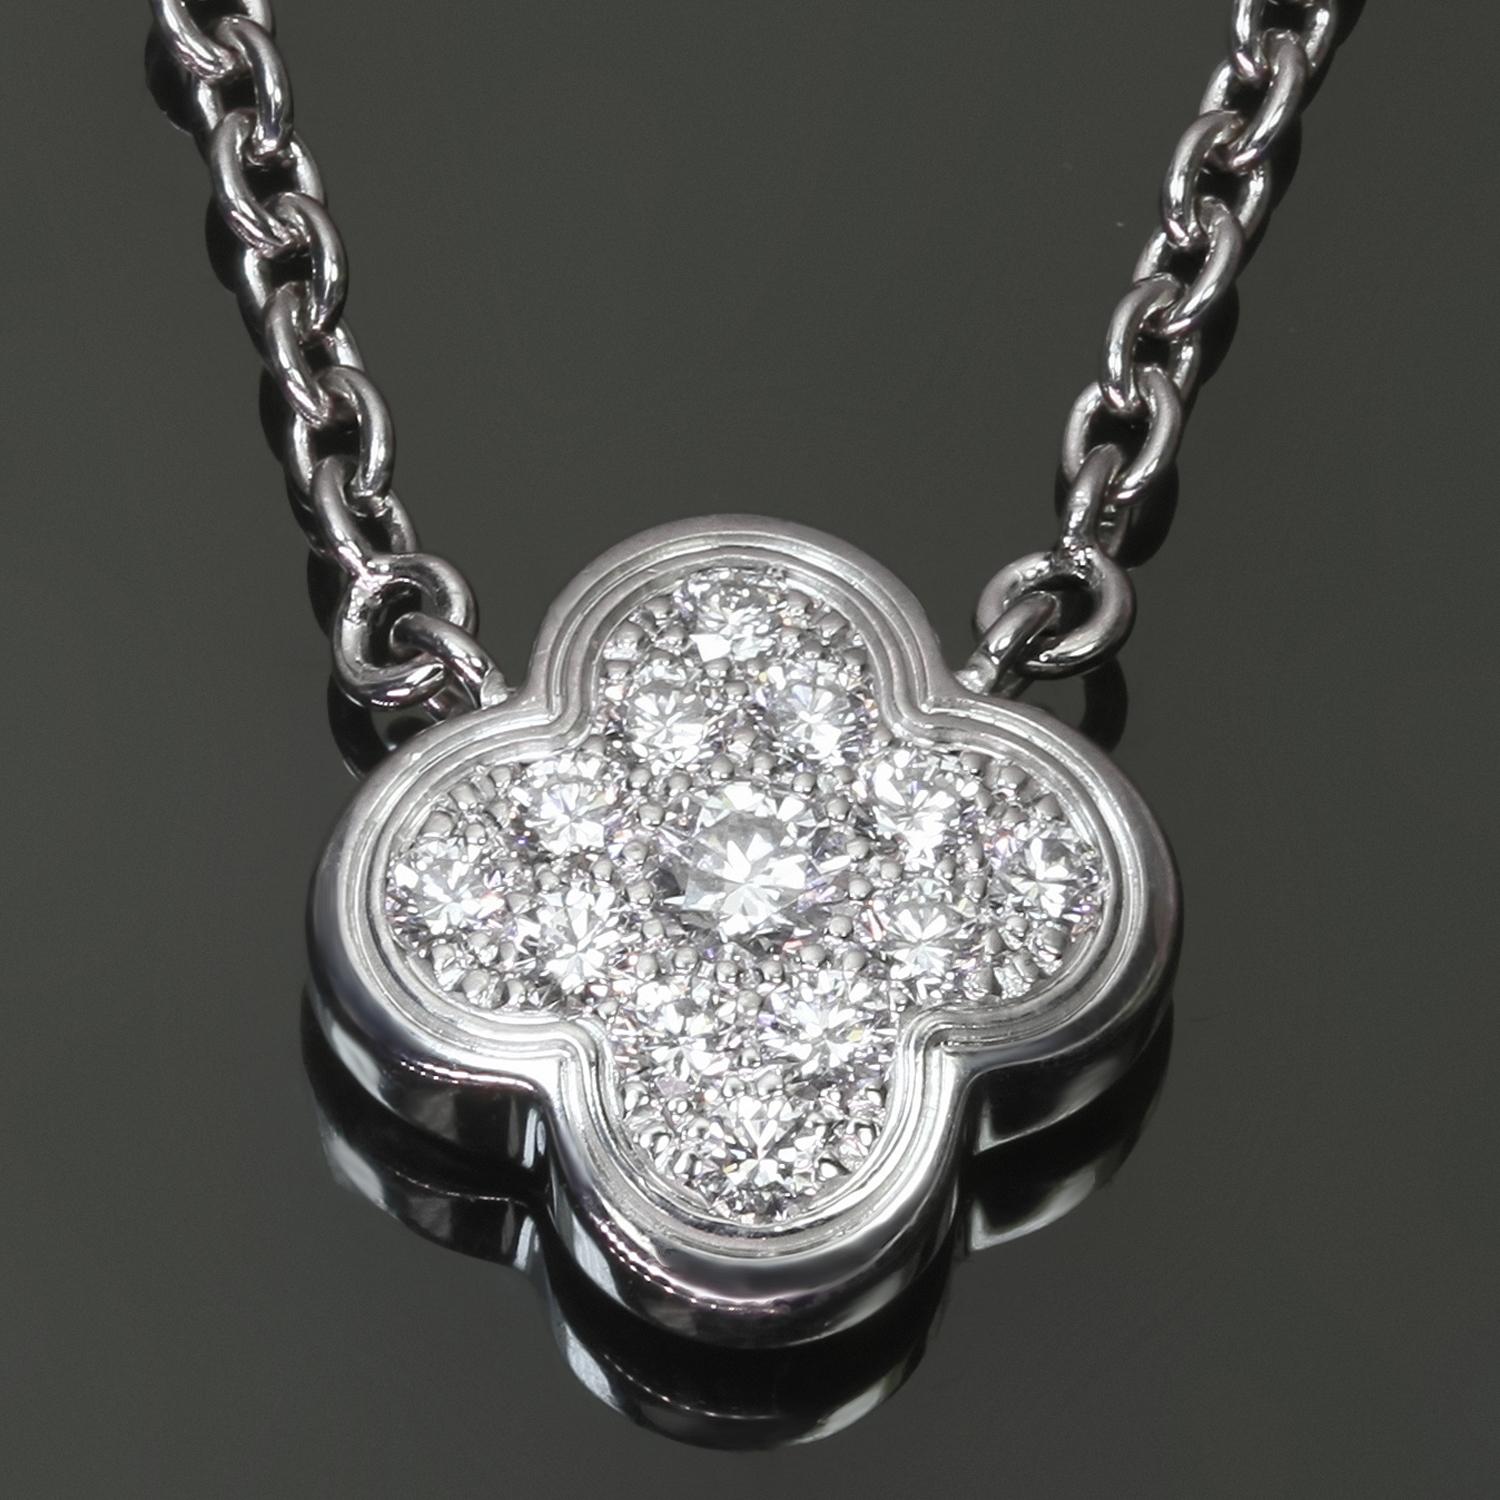 This fabulous Van Cleef & Arpels necklace from the iconic Pure Alhambra collection features the lucky clover pendant crafted in 18k white gold and set with D-E-F VVS1-VVS2 brilliant-cut round diamonds. Completed with an adjustable length chain. Made